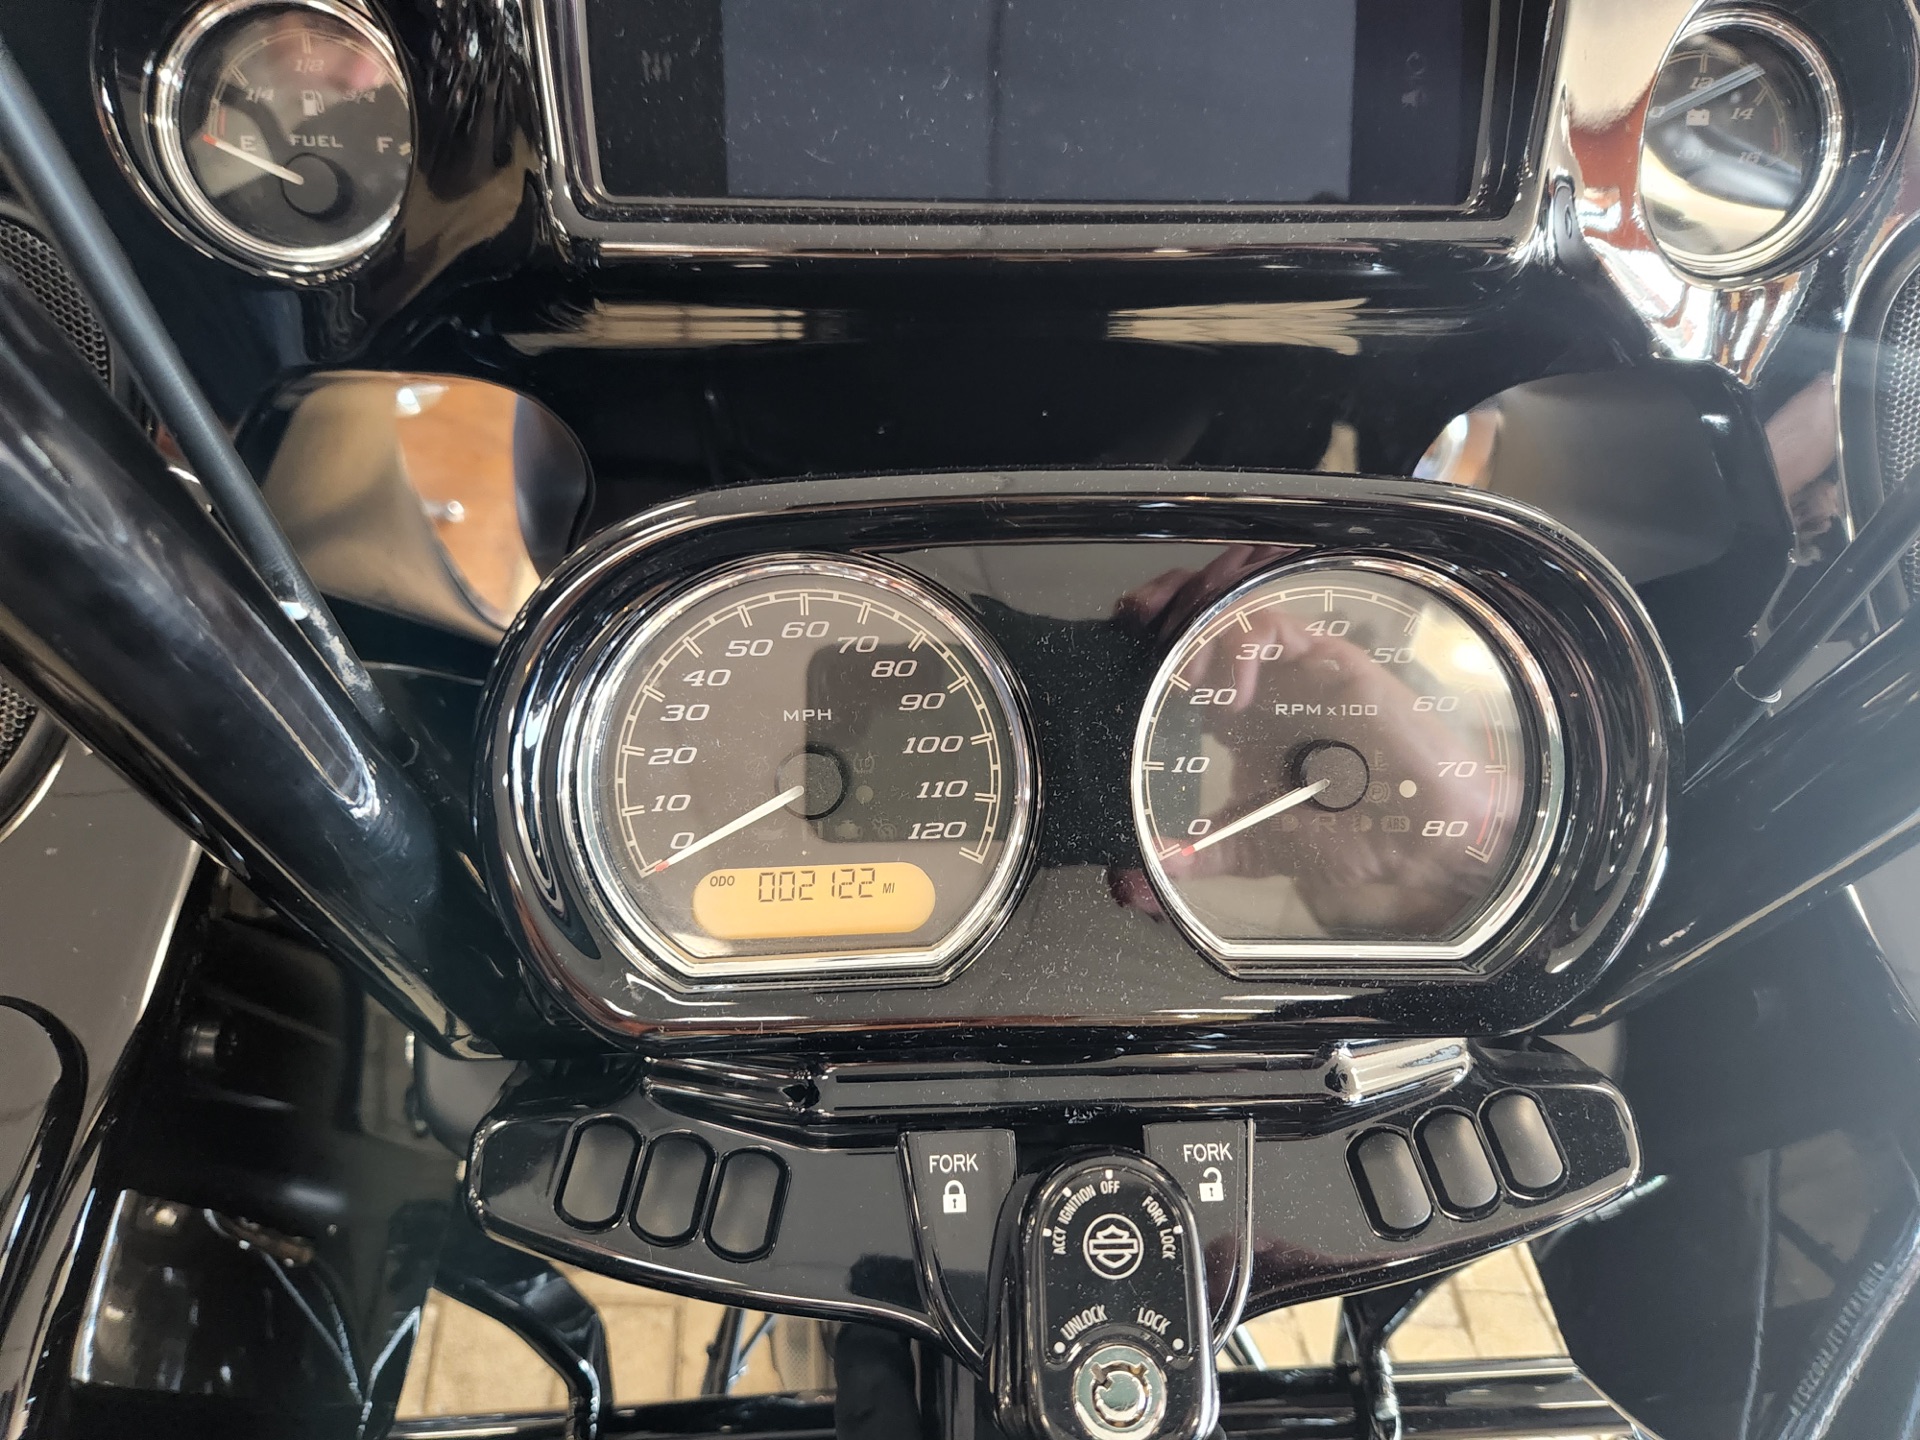 2020 Harley-Davidson Road Glide Special in Marion, Illinois - Photo 3